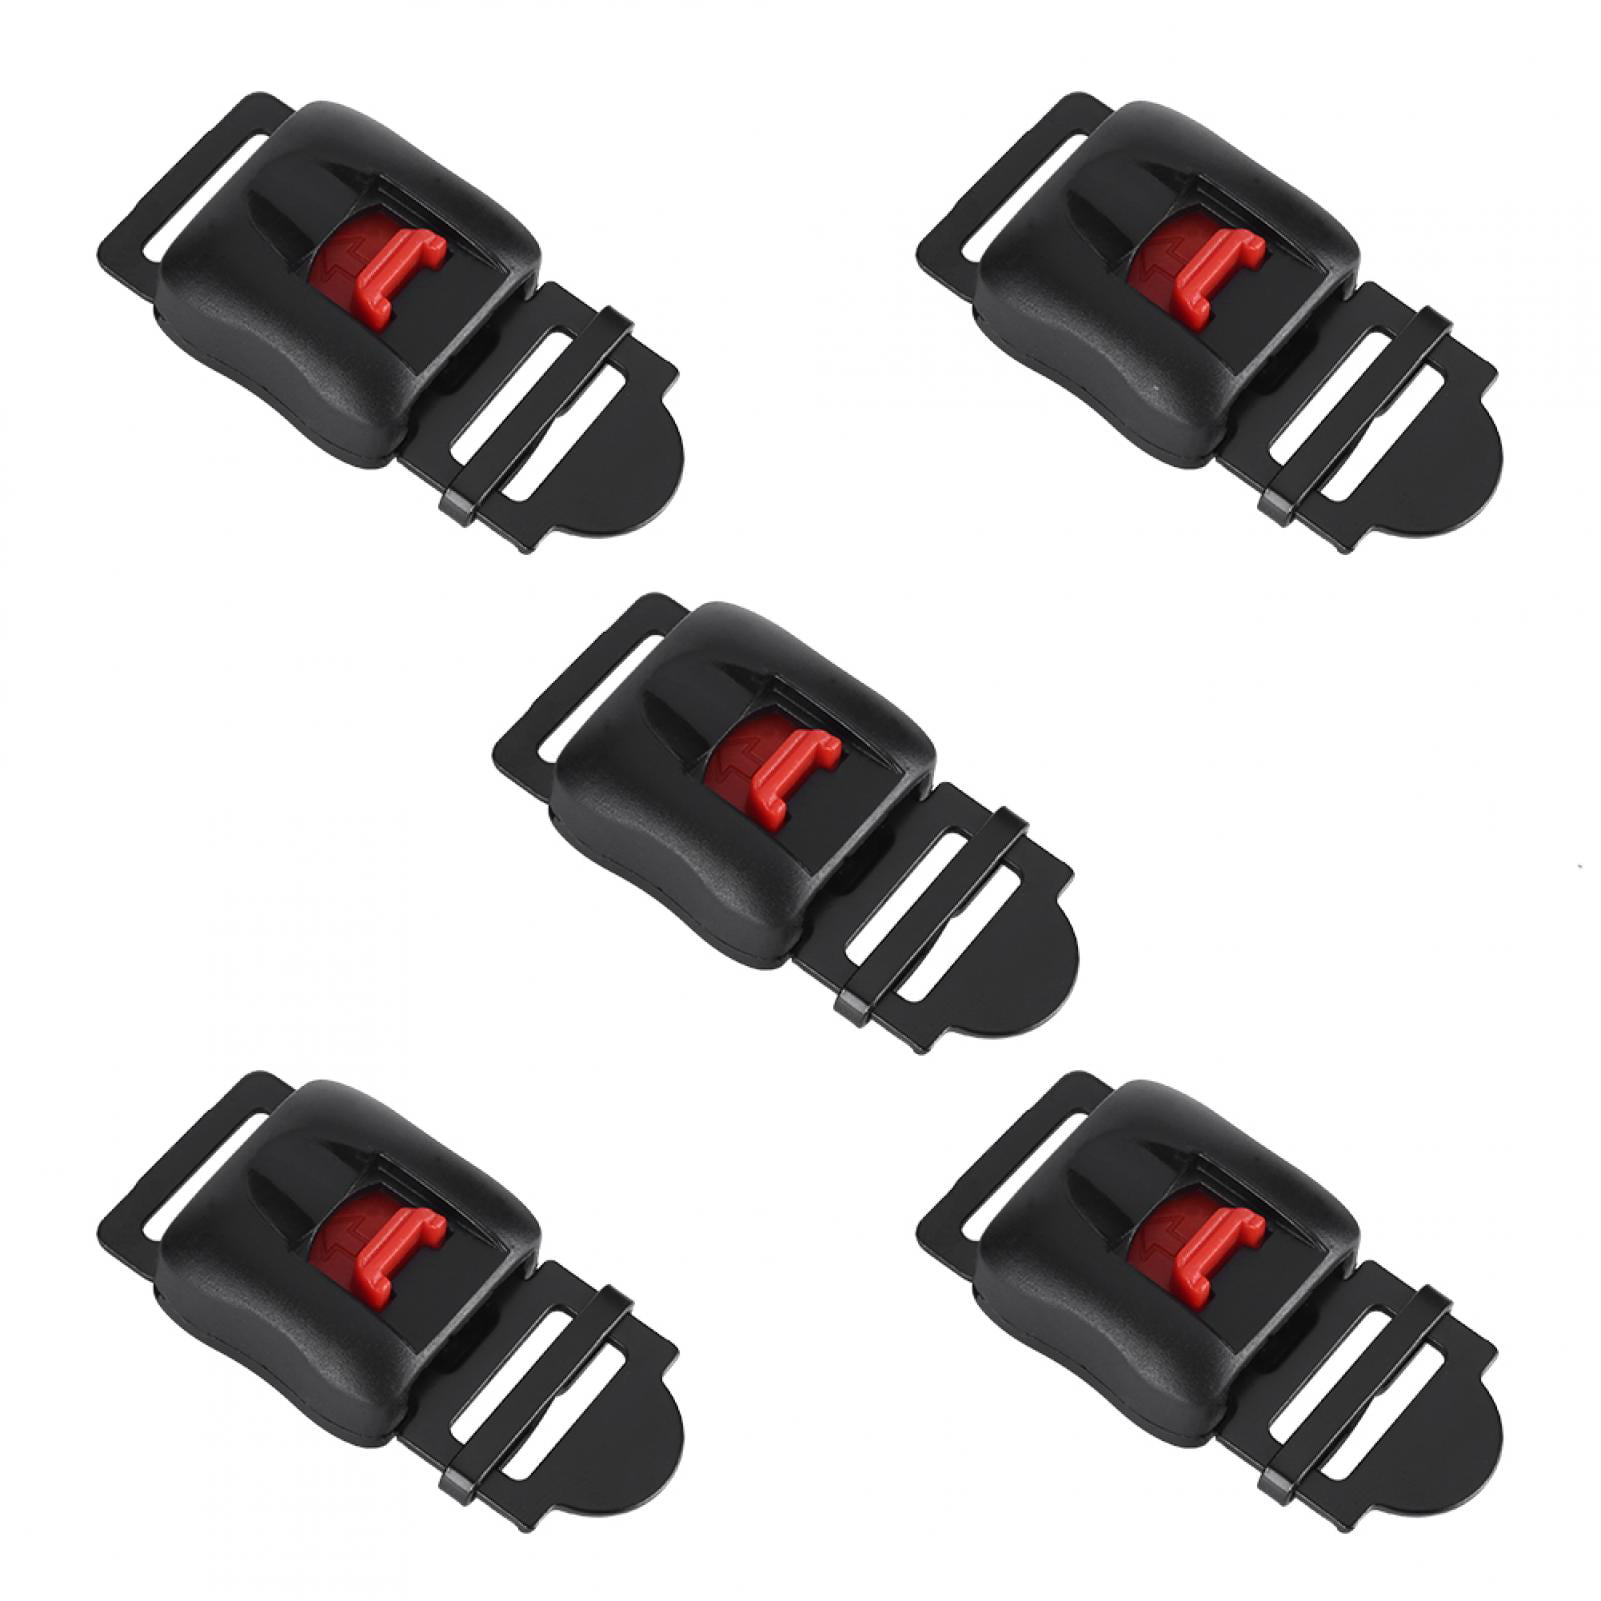 5Pcs Motorcycle Helmet Speed Clip Chin Strap Quick Release Disconnect Buckle Hot